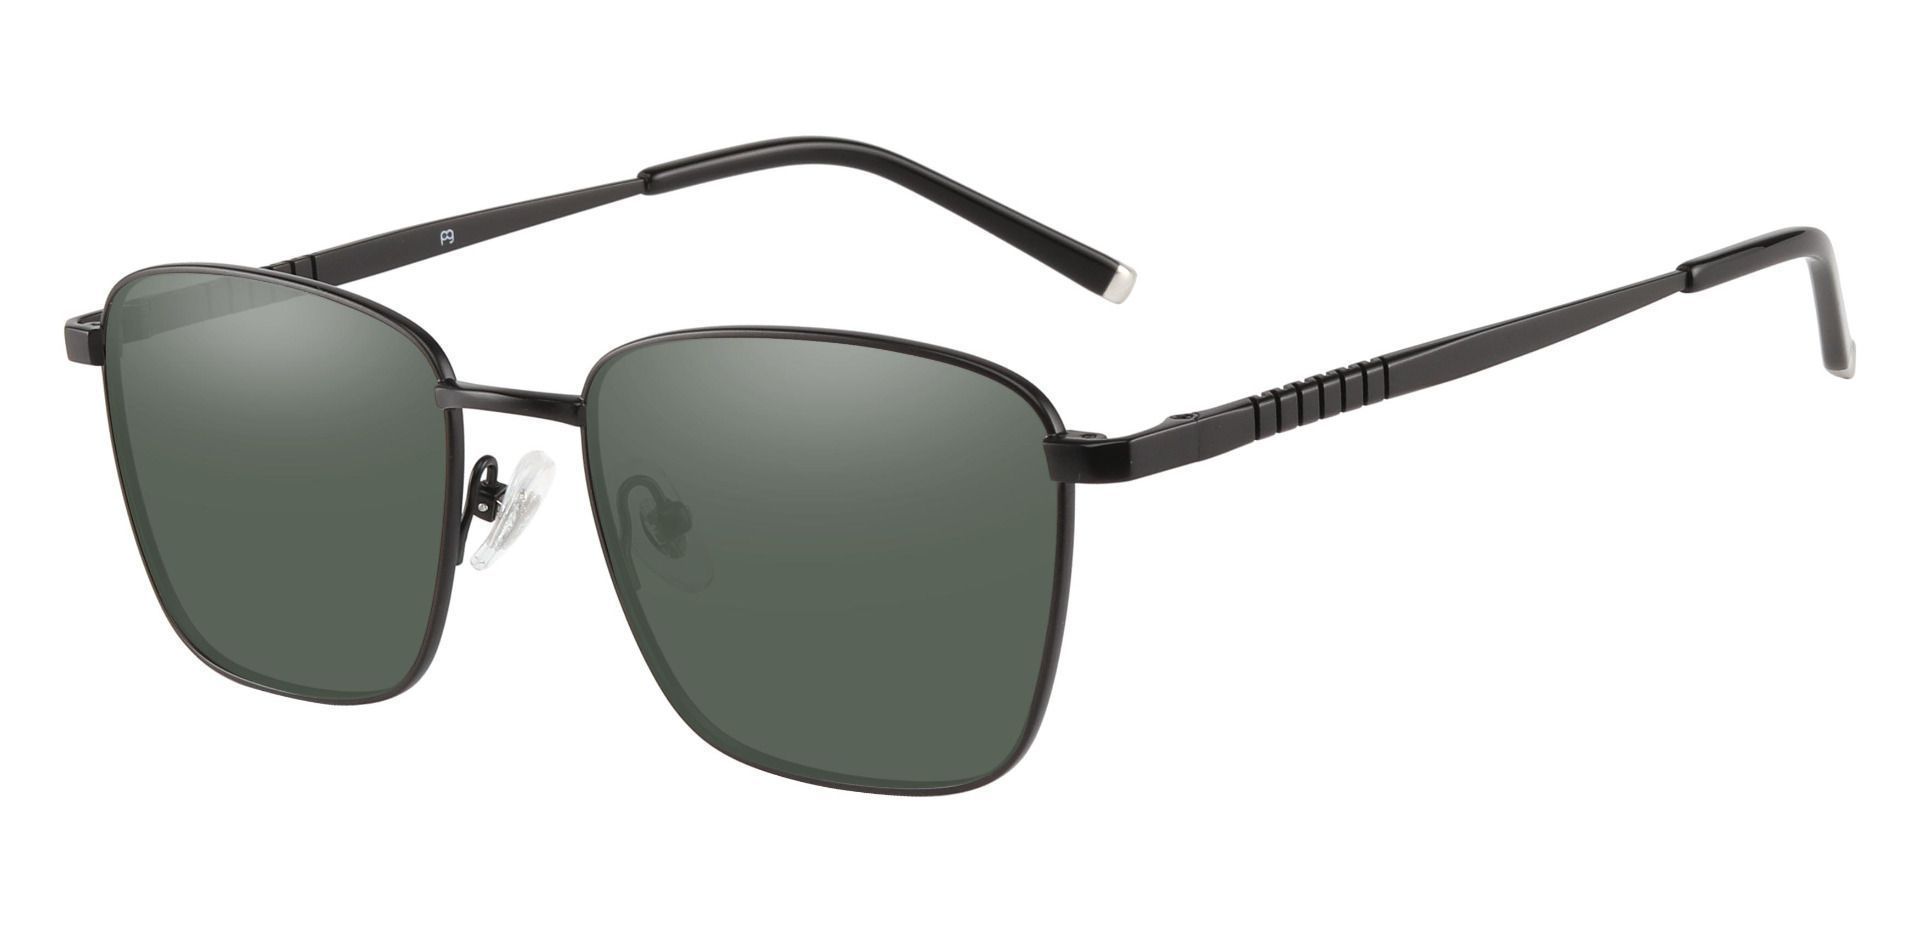 May Square Reading Sunglasses - Black Frame With Green Lenses